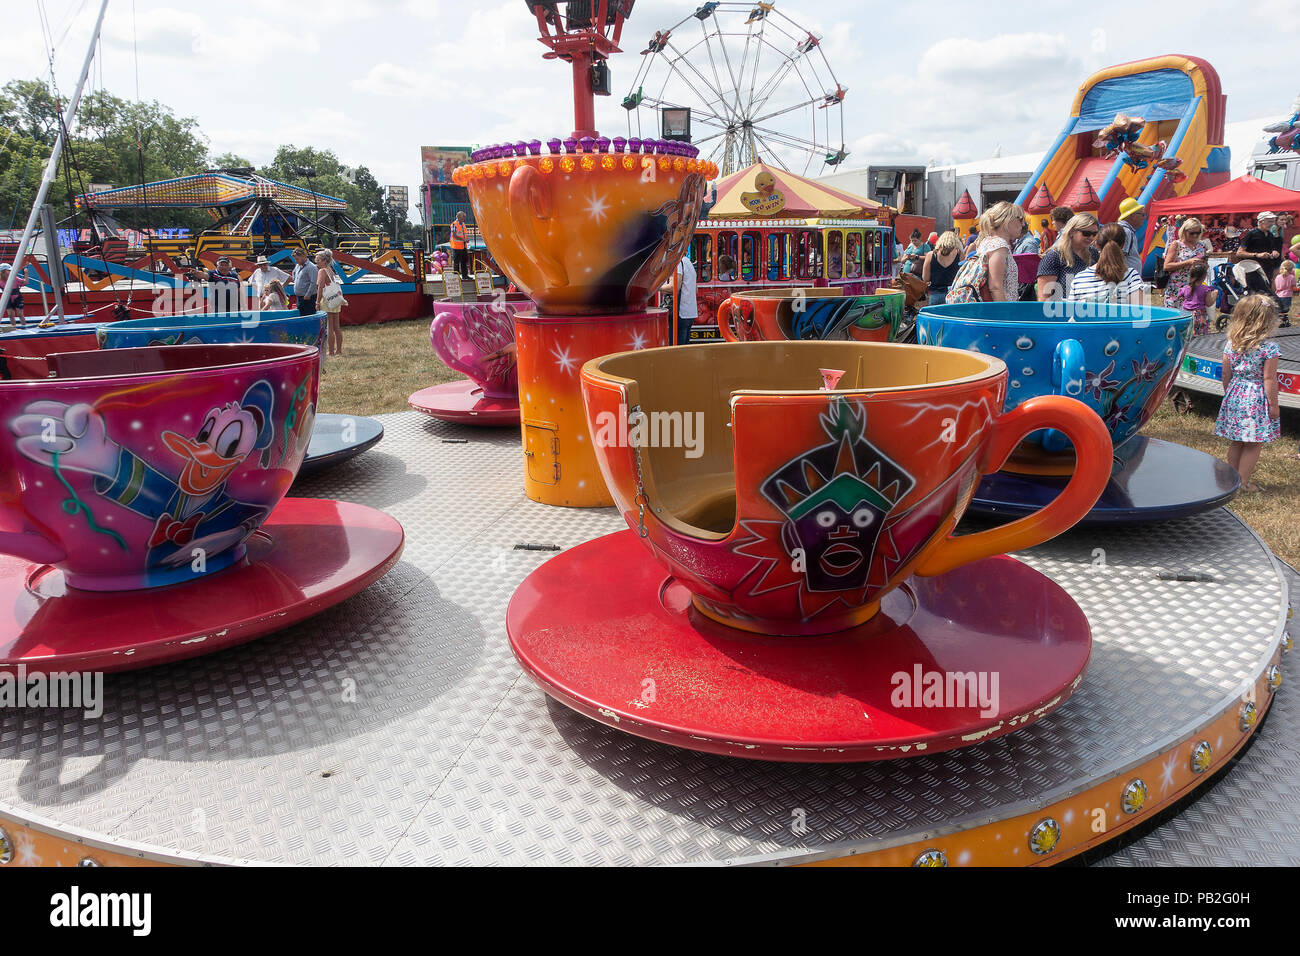 Colourful Cup and Saucer Roundabout Fairground Ride for Children on a Sunny Day at Nantwich Agricultural Show Cheshire England United Kingdom UK Stock Photo